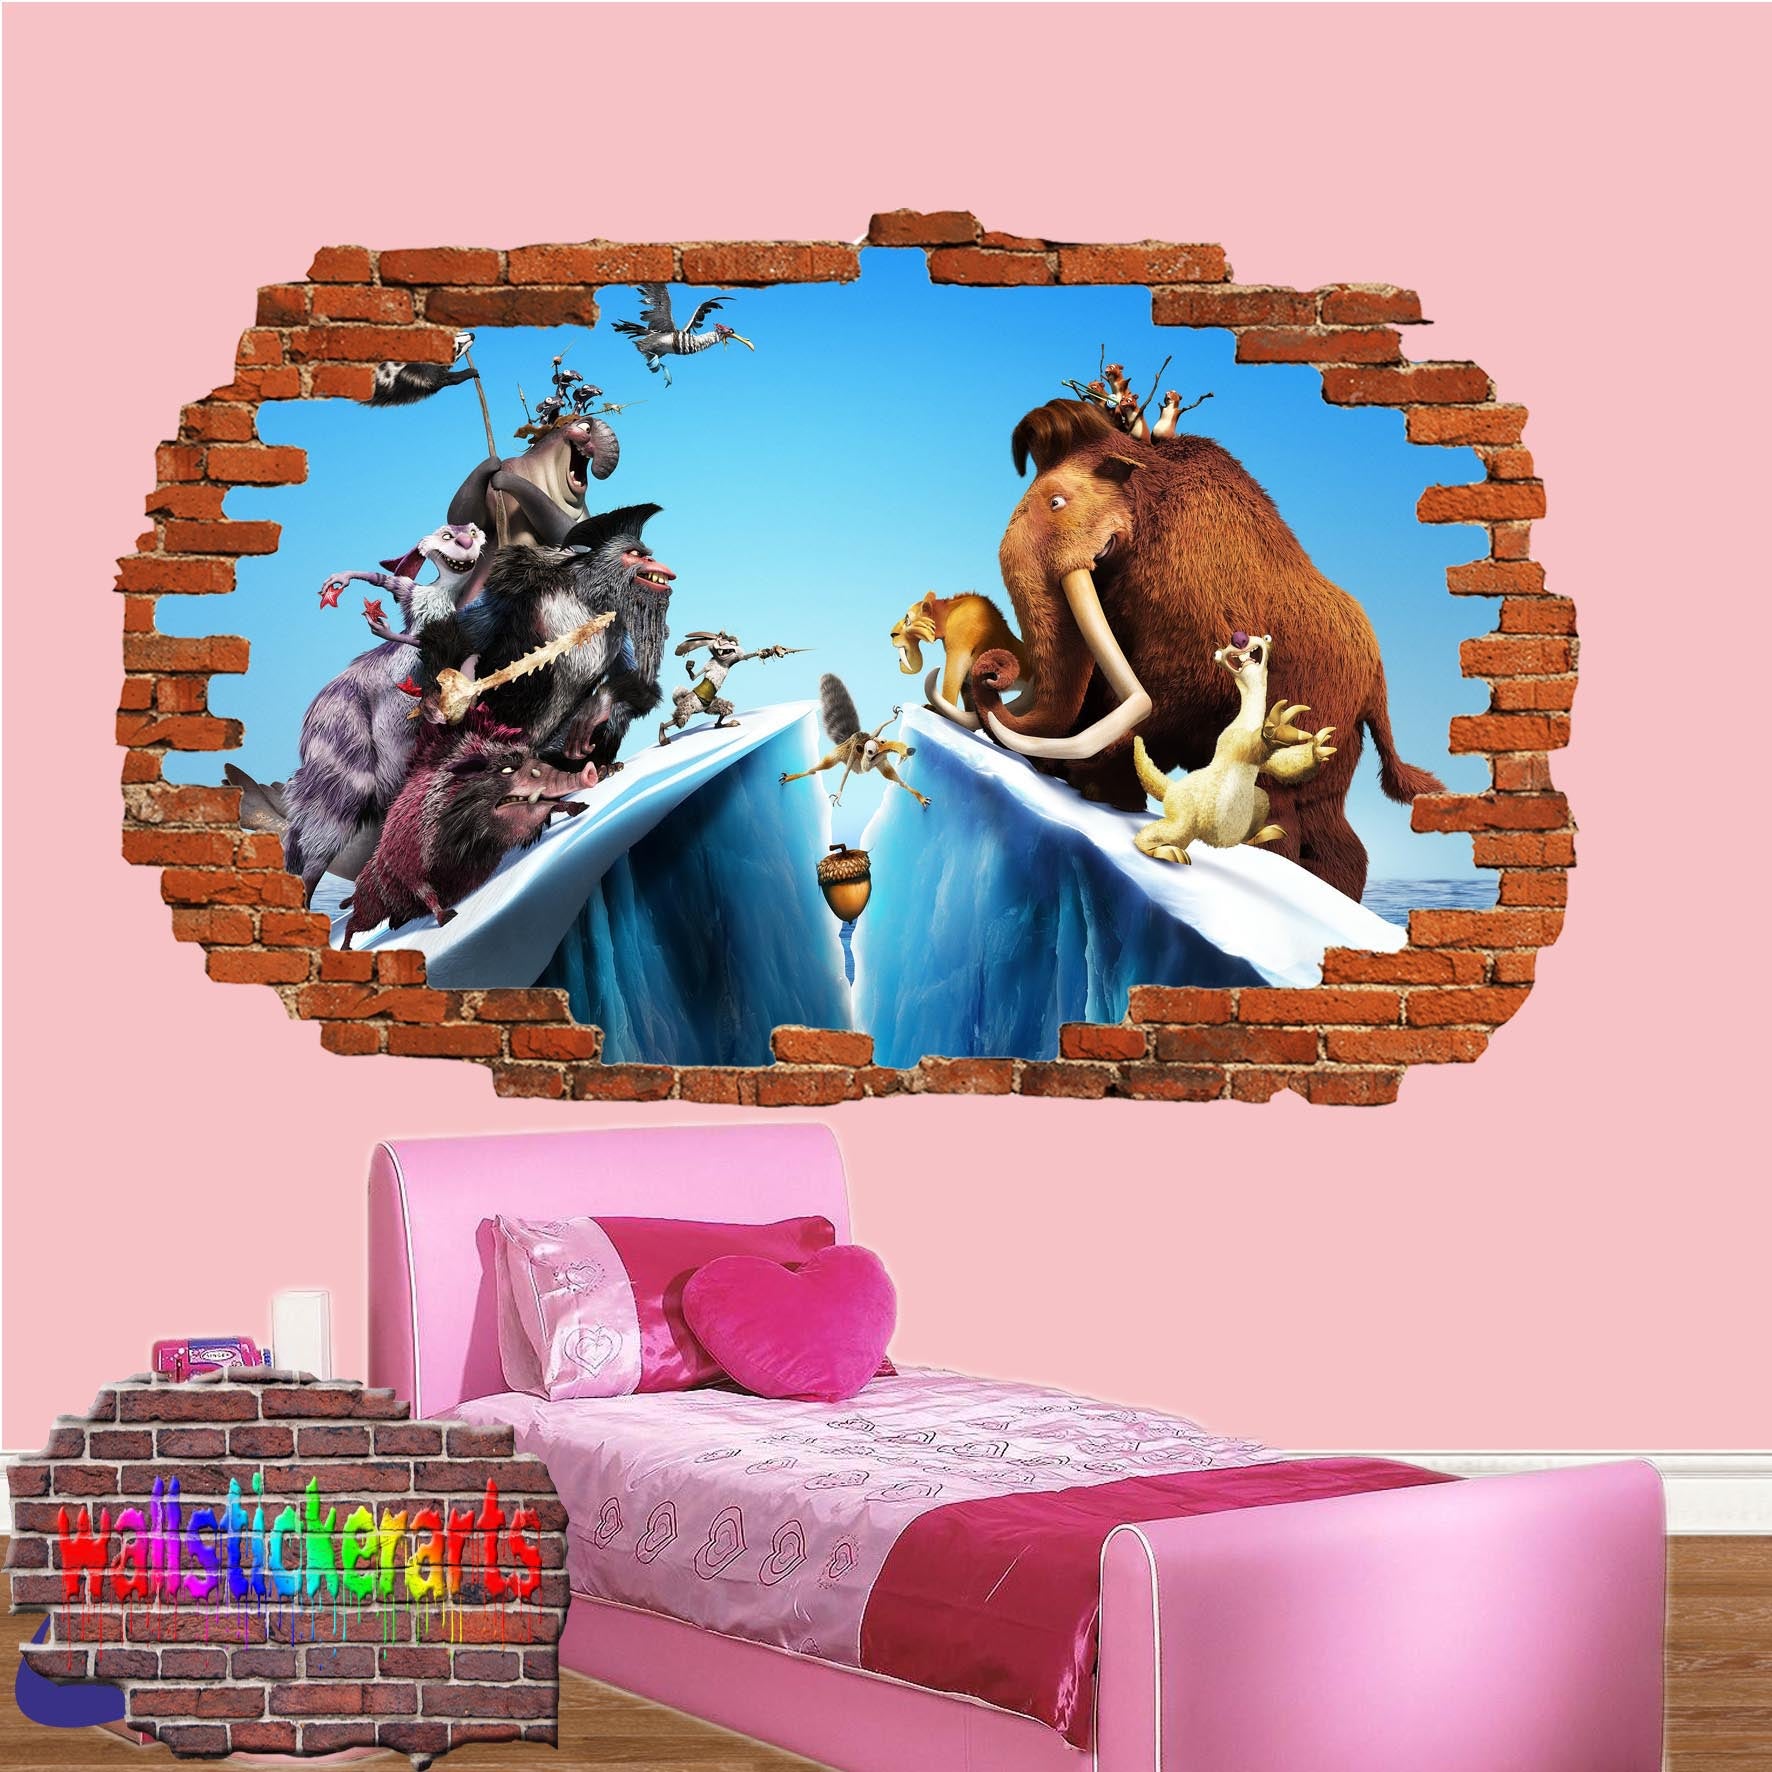 ICE AGE CARTOON CHARACTERS WALL STICKER MURAL DECAL POSTER